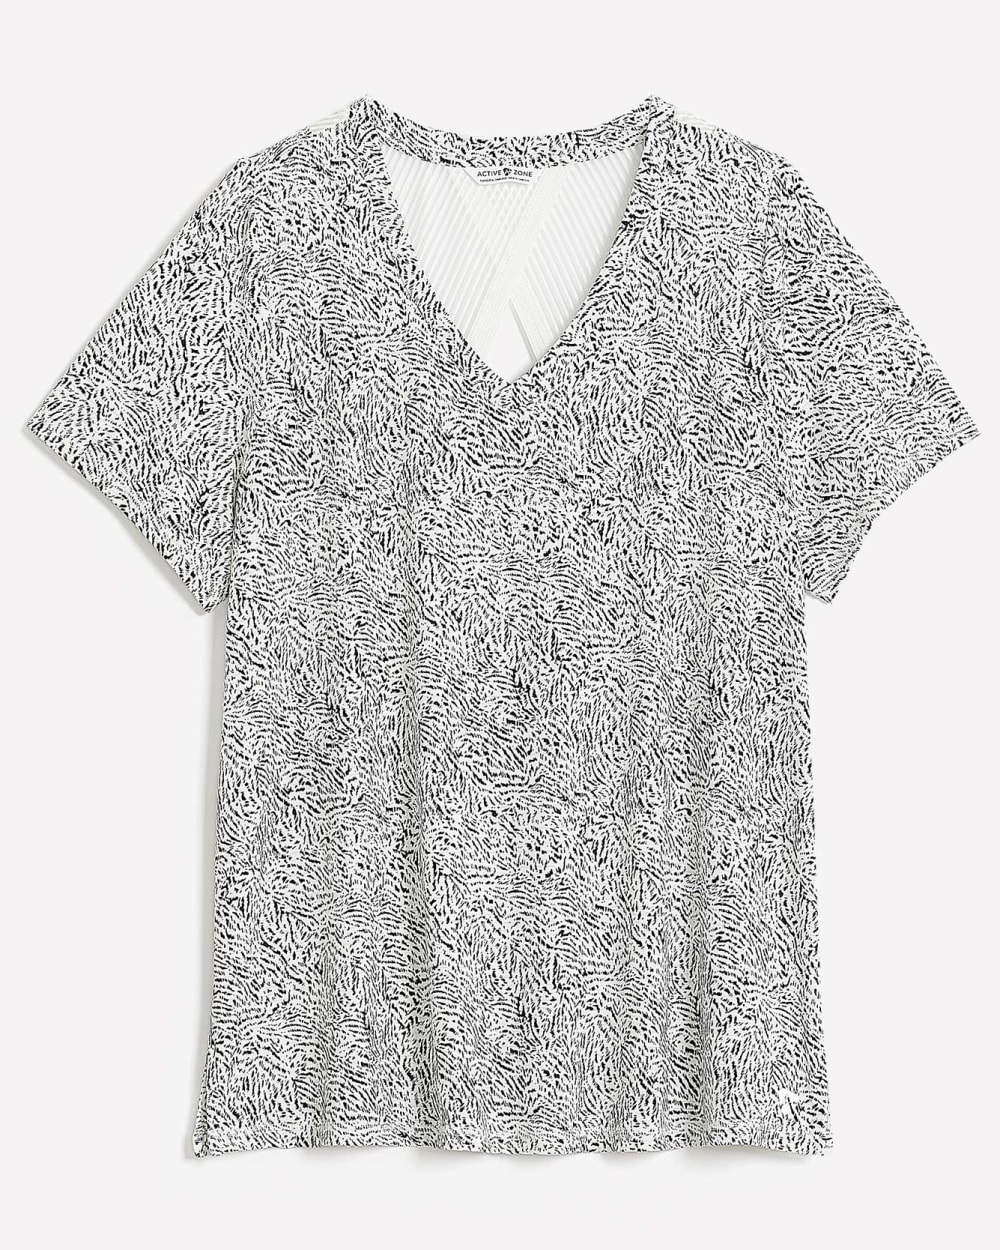 Printed Short-Sleeve Tee with Crisscross Mesh Back - Active Zone